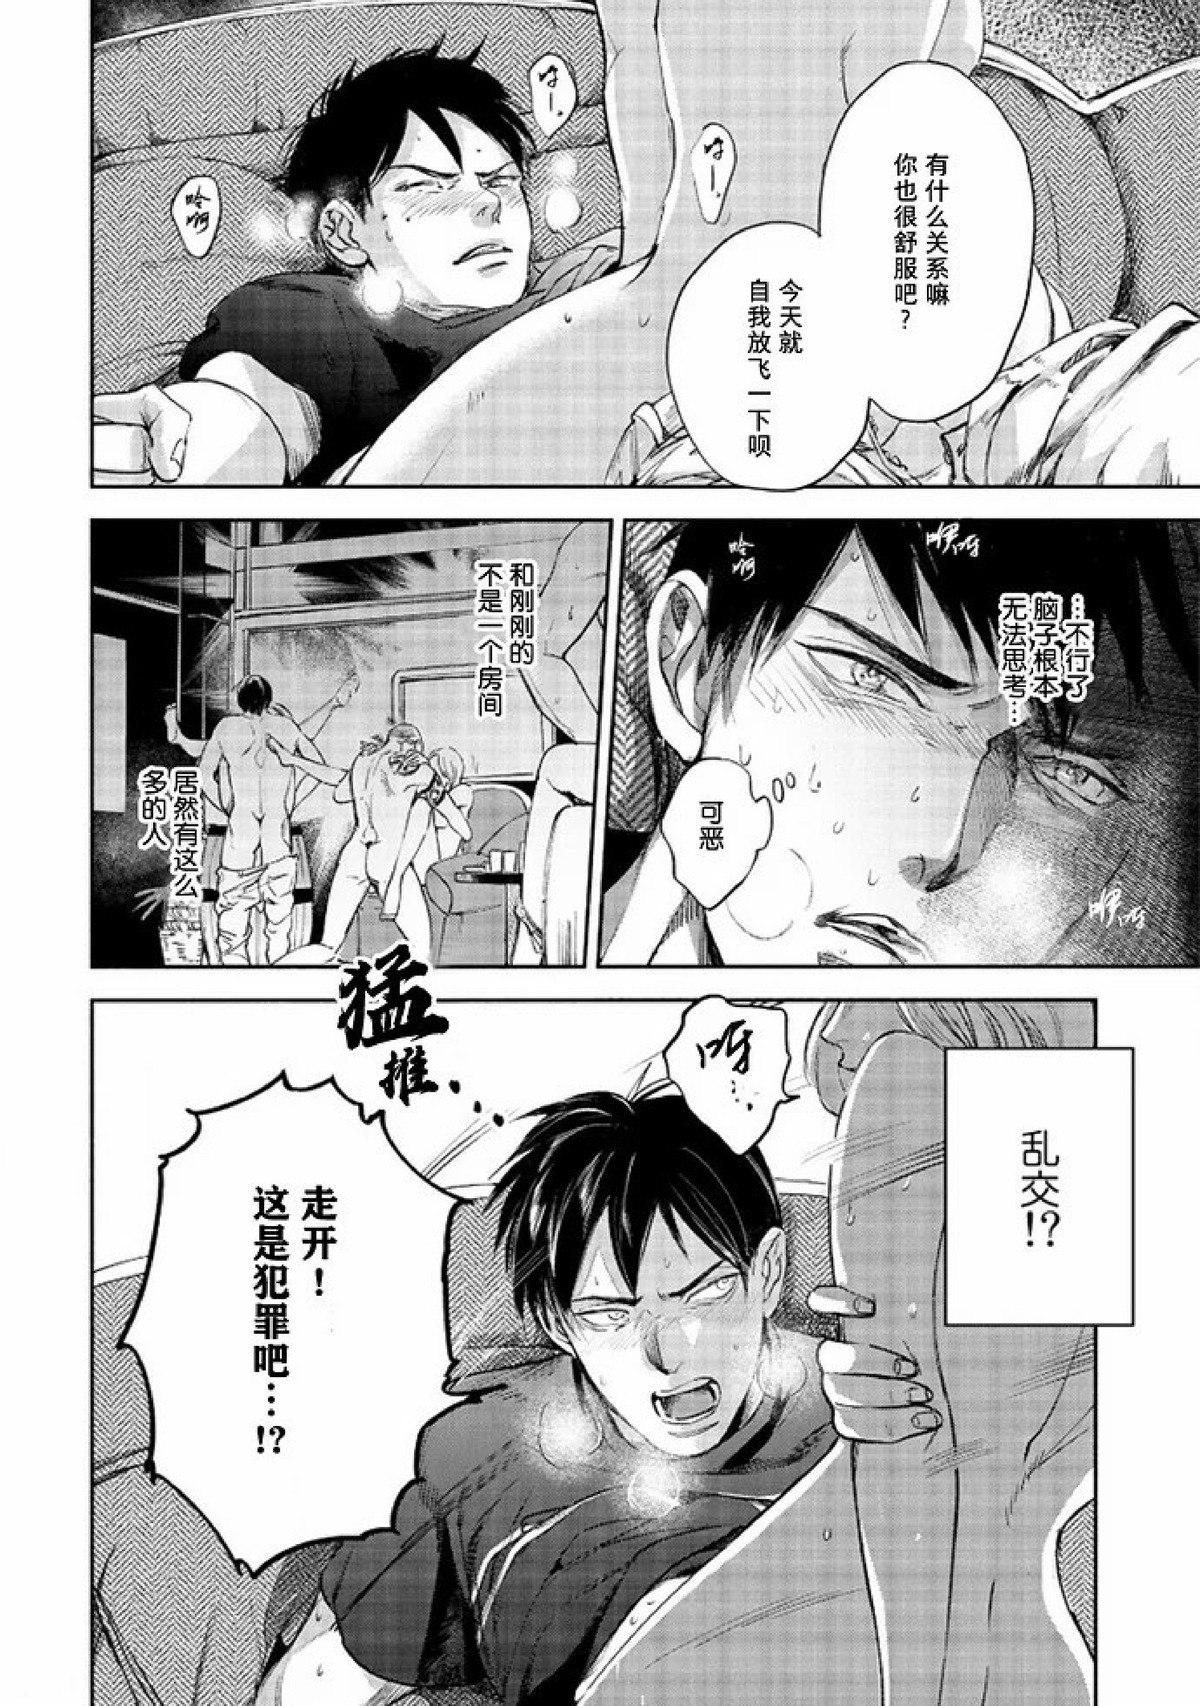 【Two sides of the same coin[腐漫]】漫画-（上卷01-02）章节漫画下拉式图片-46.jpg